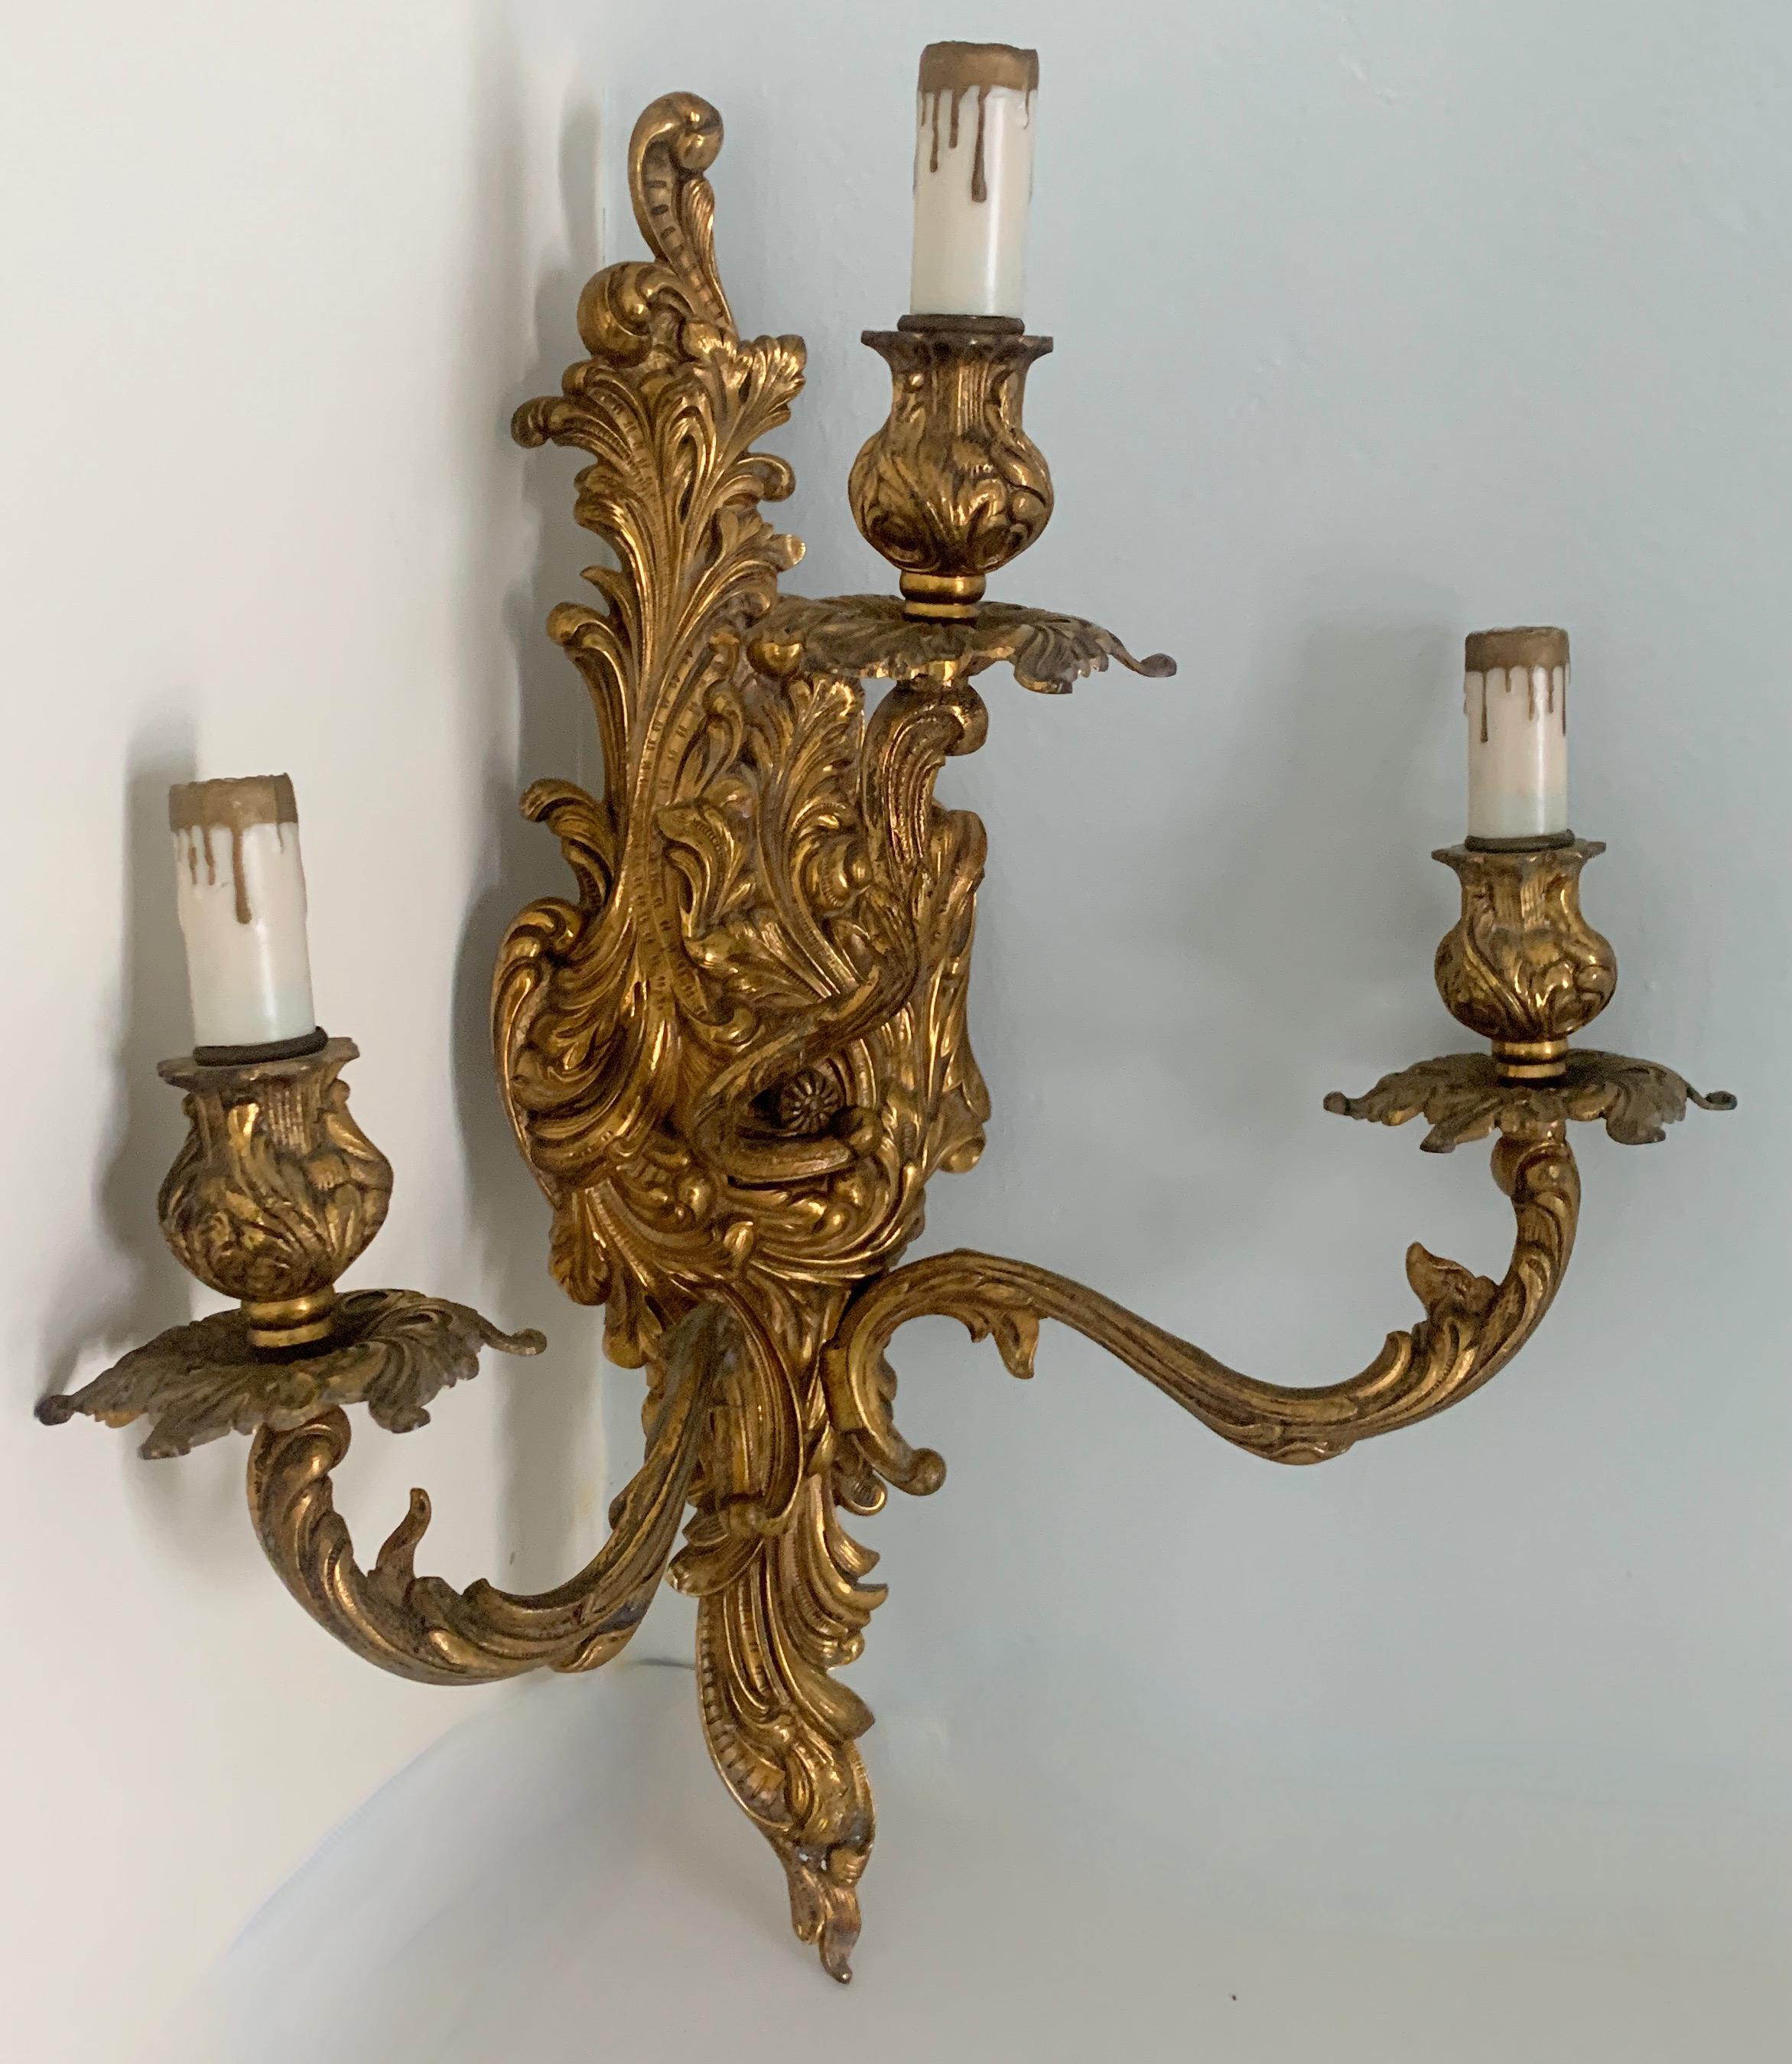 A very nice single gilt French wall sconce.